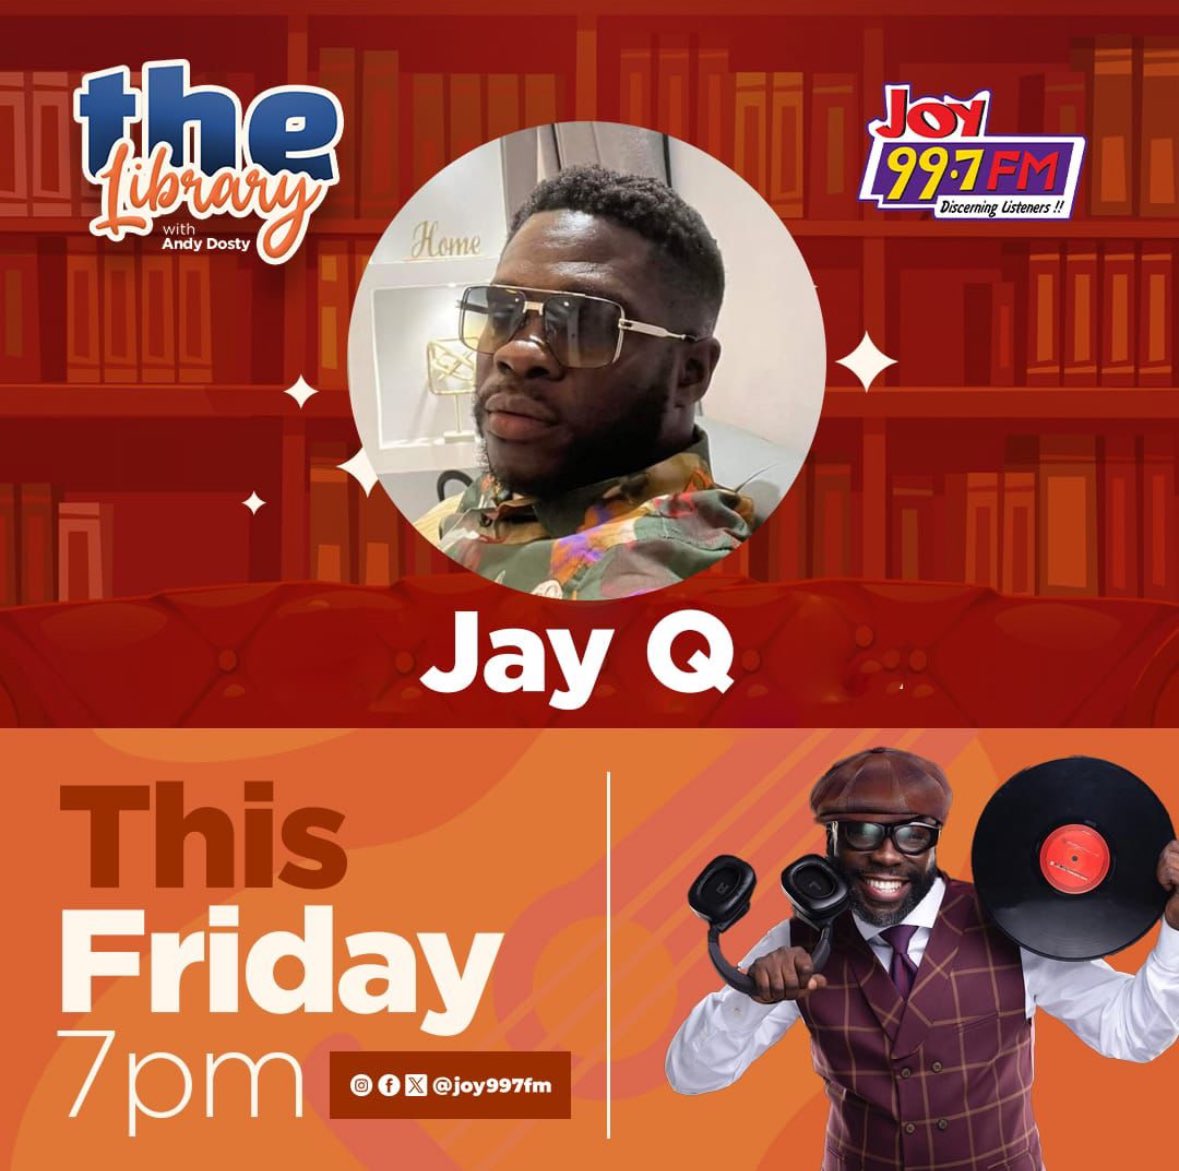 Find out how Jacket (remix) by PRAYE was created as @simply_kod , @CAPTAINPLANETGH @coded4x4 @samini_dagaati @Wutahkobby @AWutah etc discuss The bottle breaker @JAYQGH on #TheLibrary from 7-9pm on @Joy997FM. Tune in to GHANA’s BEST RADIO SHOW #TheLibrary